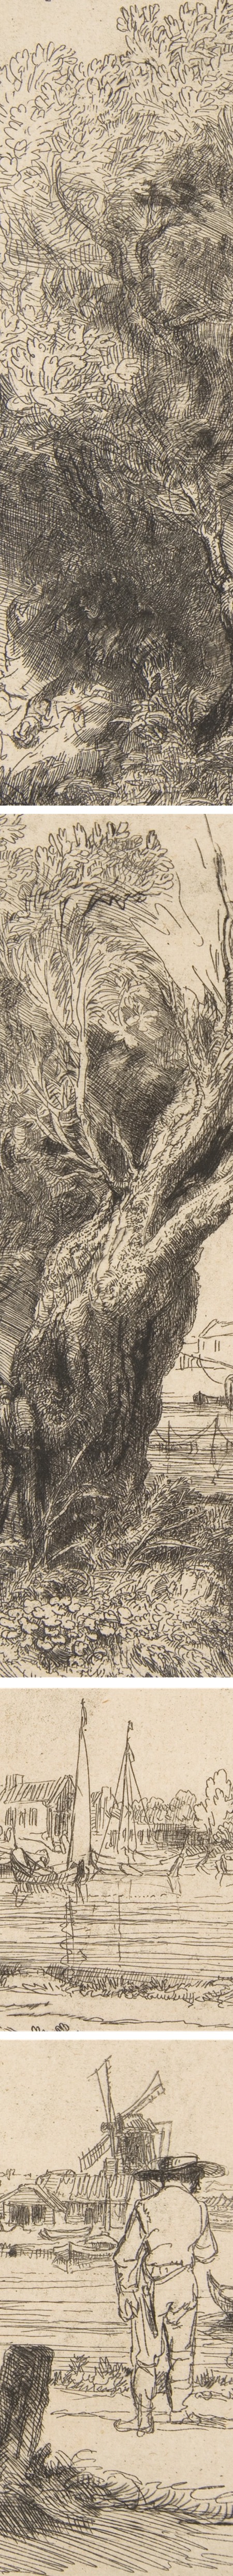 Rembrandt etching, The Omval (details)